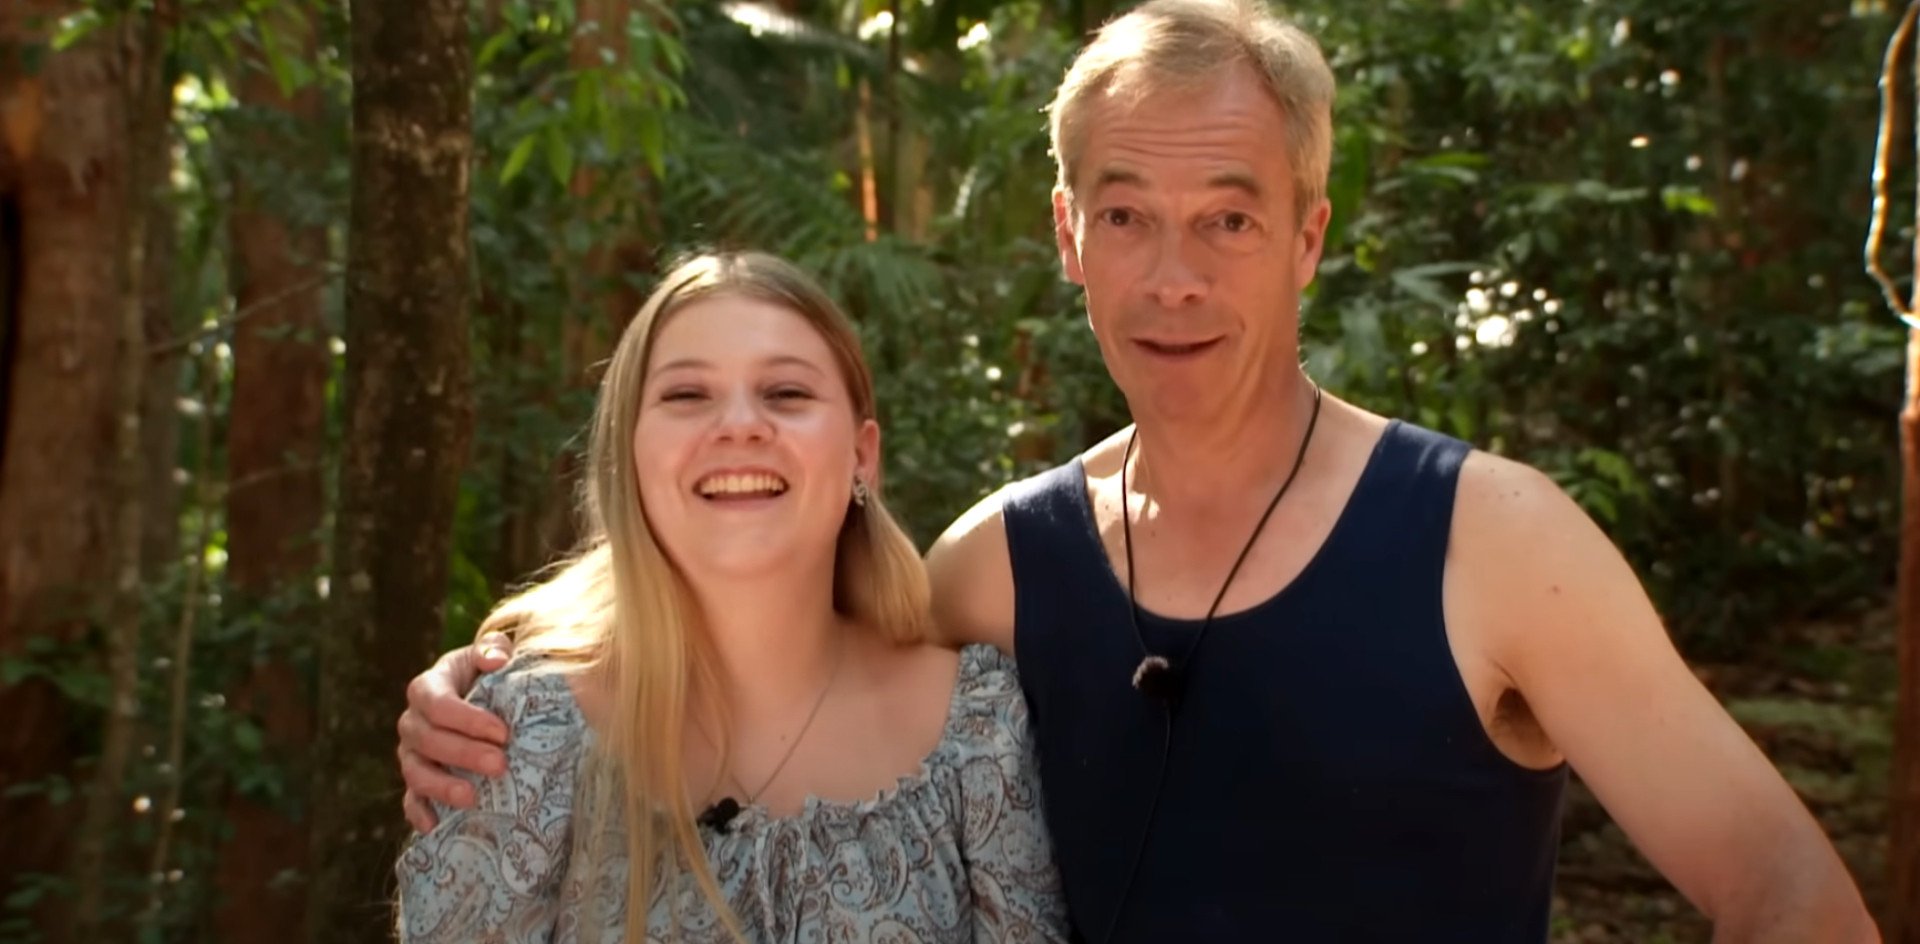 Nigel Farage with his daughter Isabelle. Photo: I’m a Celebrity... Get Me Out of Here!/YouTube 